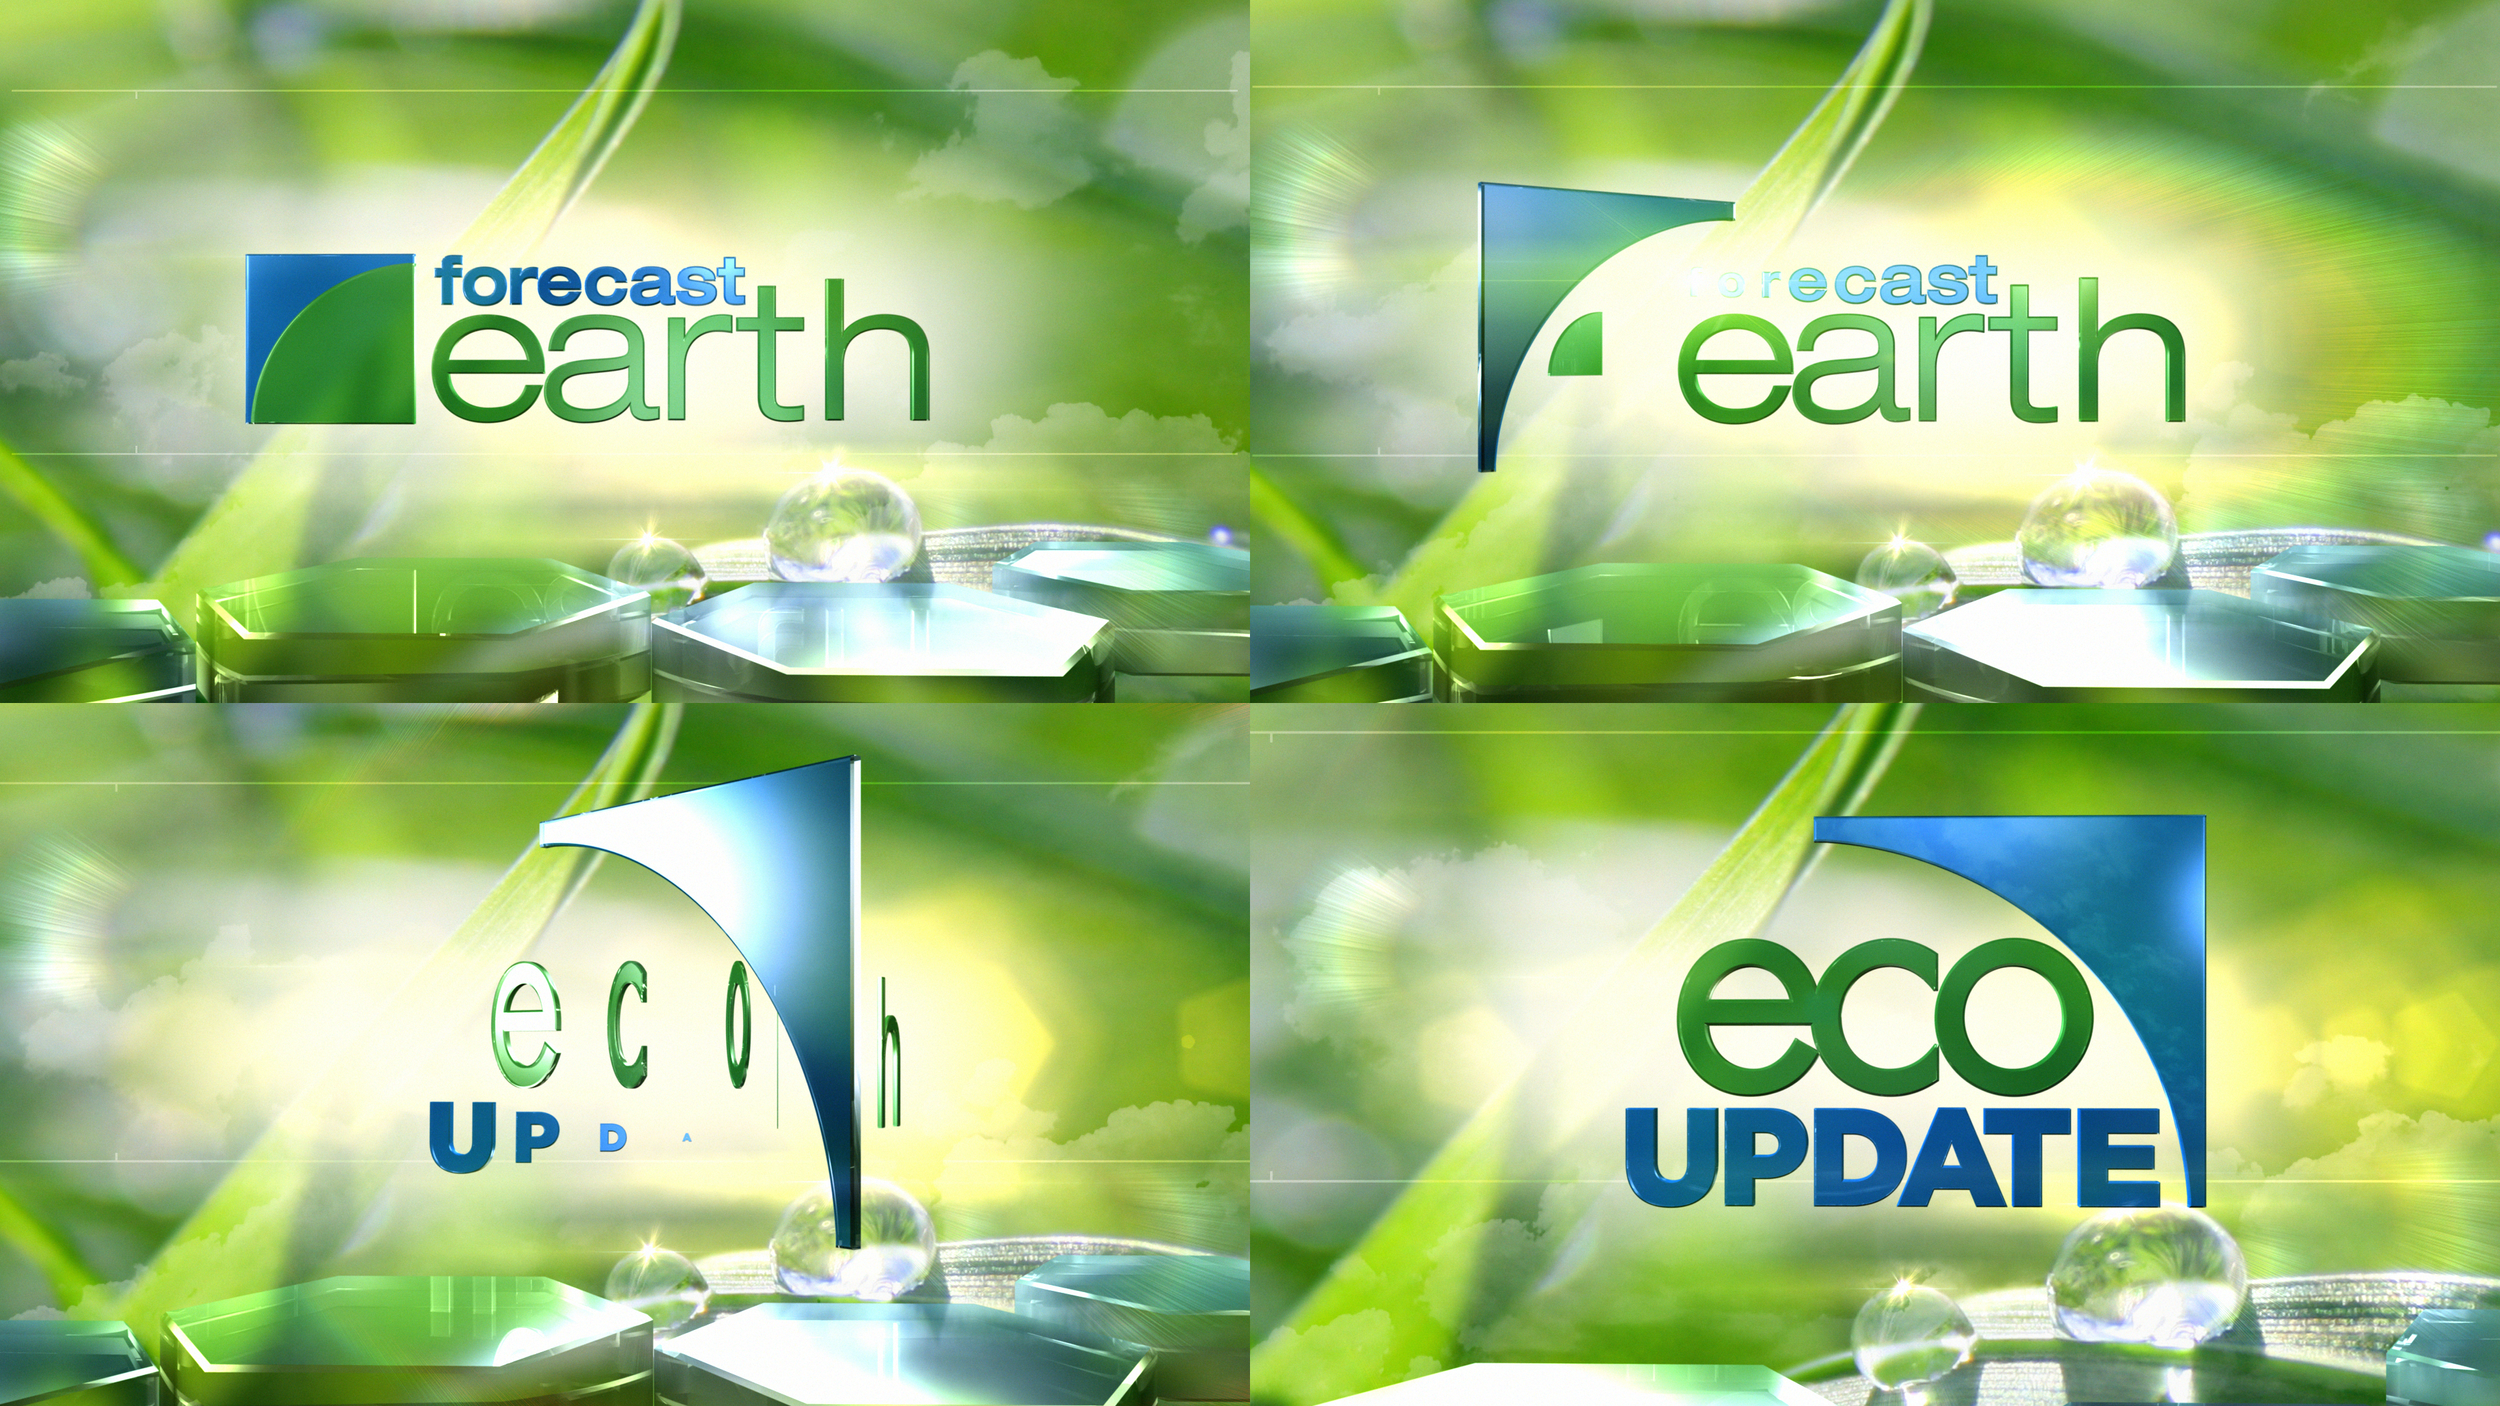 forecast_earth_eco_update_4K.png